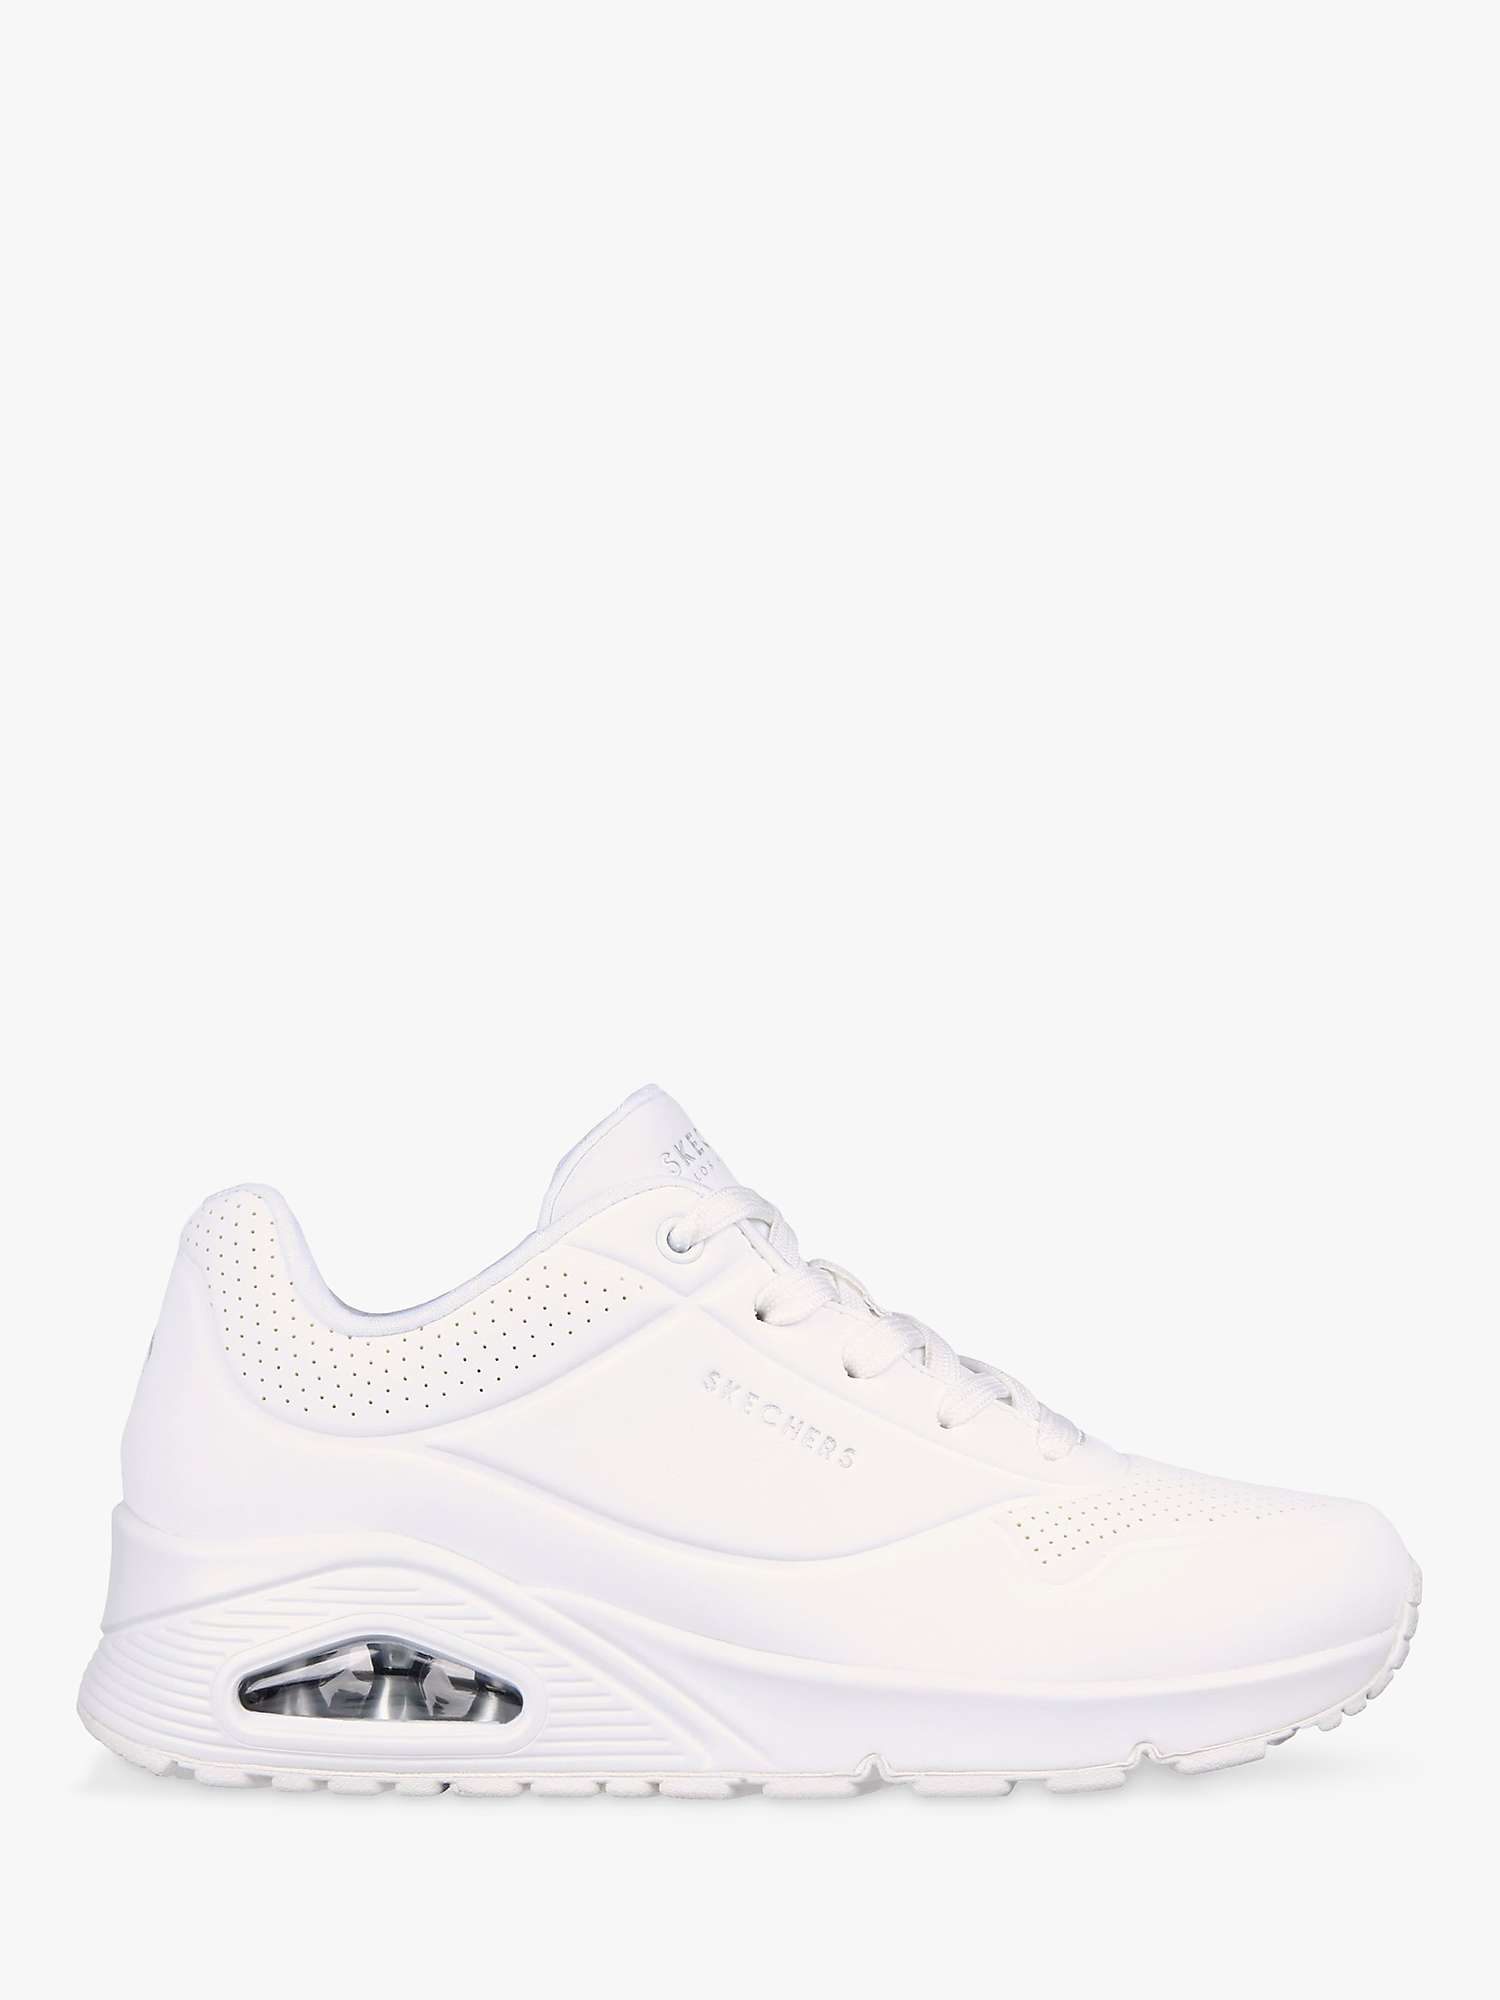 Buy Skechers Uno Stand On Air Sports Trainers, White Online at johnlewis.com